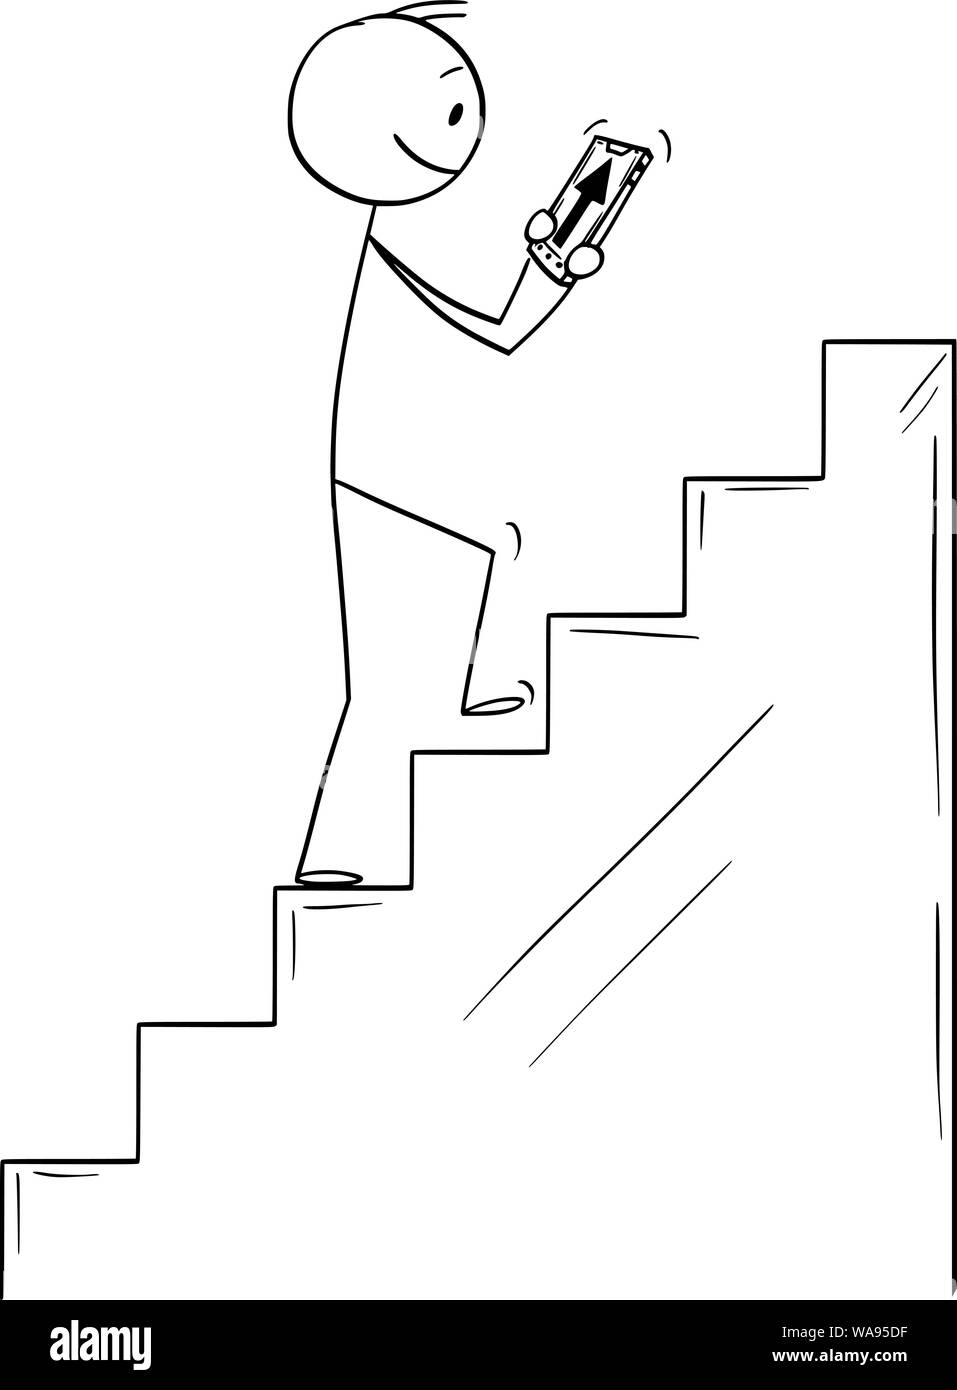 Vector cartoon stick figure drawing conceptual illustration of man climbing upstairs following incorrect navigation in mobile phone ignoring the edge in his way. Stock Vector